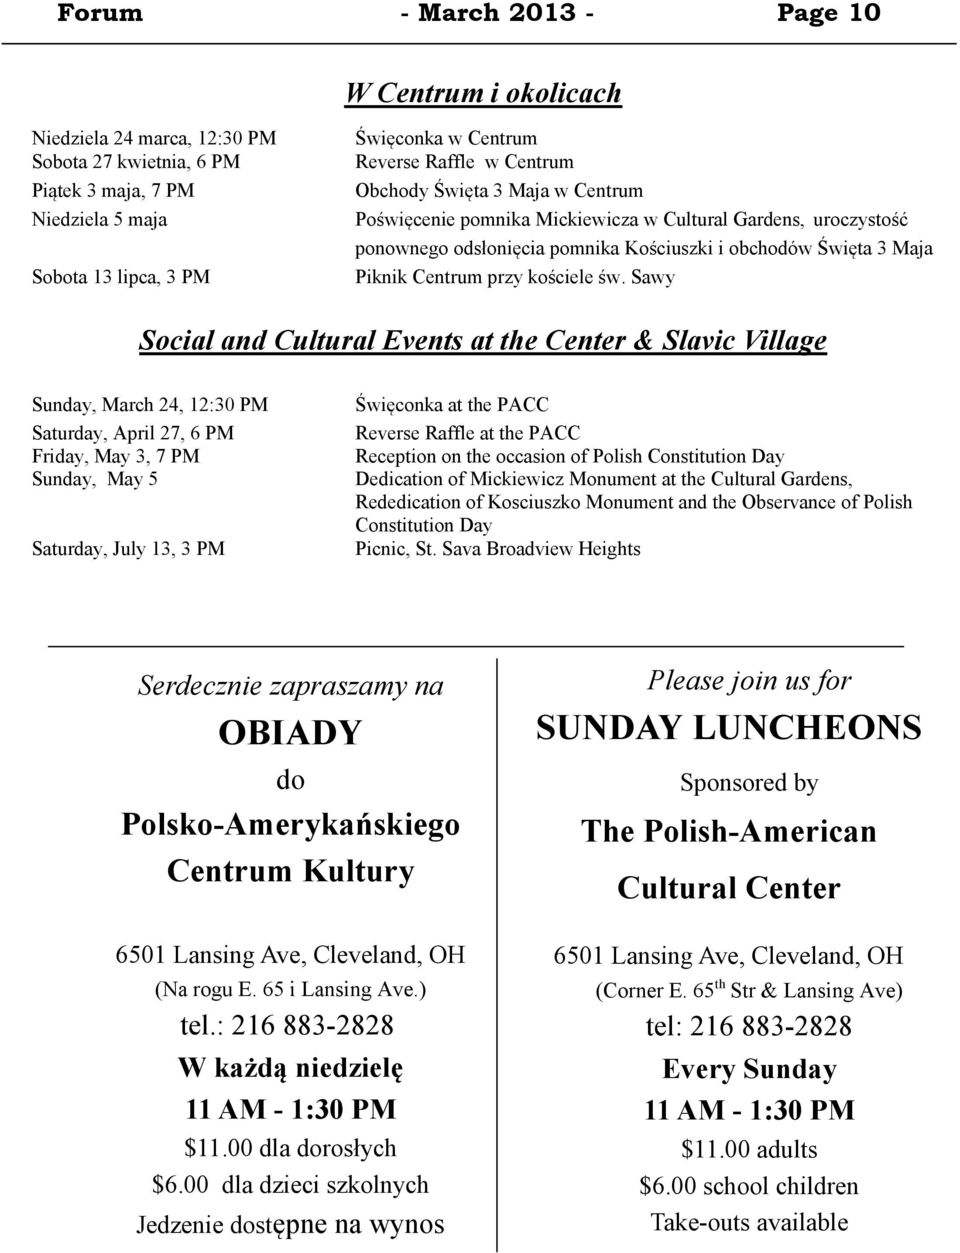 Sawy Social and Cultural Events at the Center & Slavic Village Sunday, March 24, 12:30 PM Saturday, April 27, 6 PM Żriday, May 3, 7 PM Sunday, May 5 więconka at the PACC Reverse Raffle at the PACC